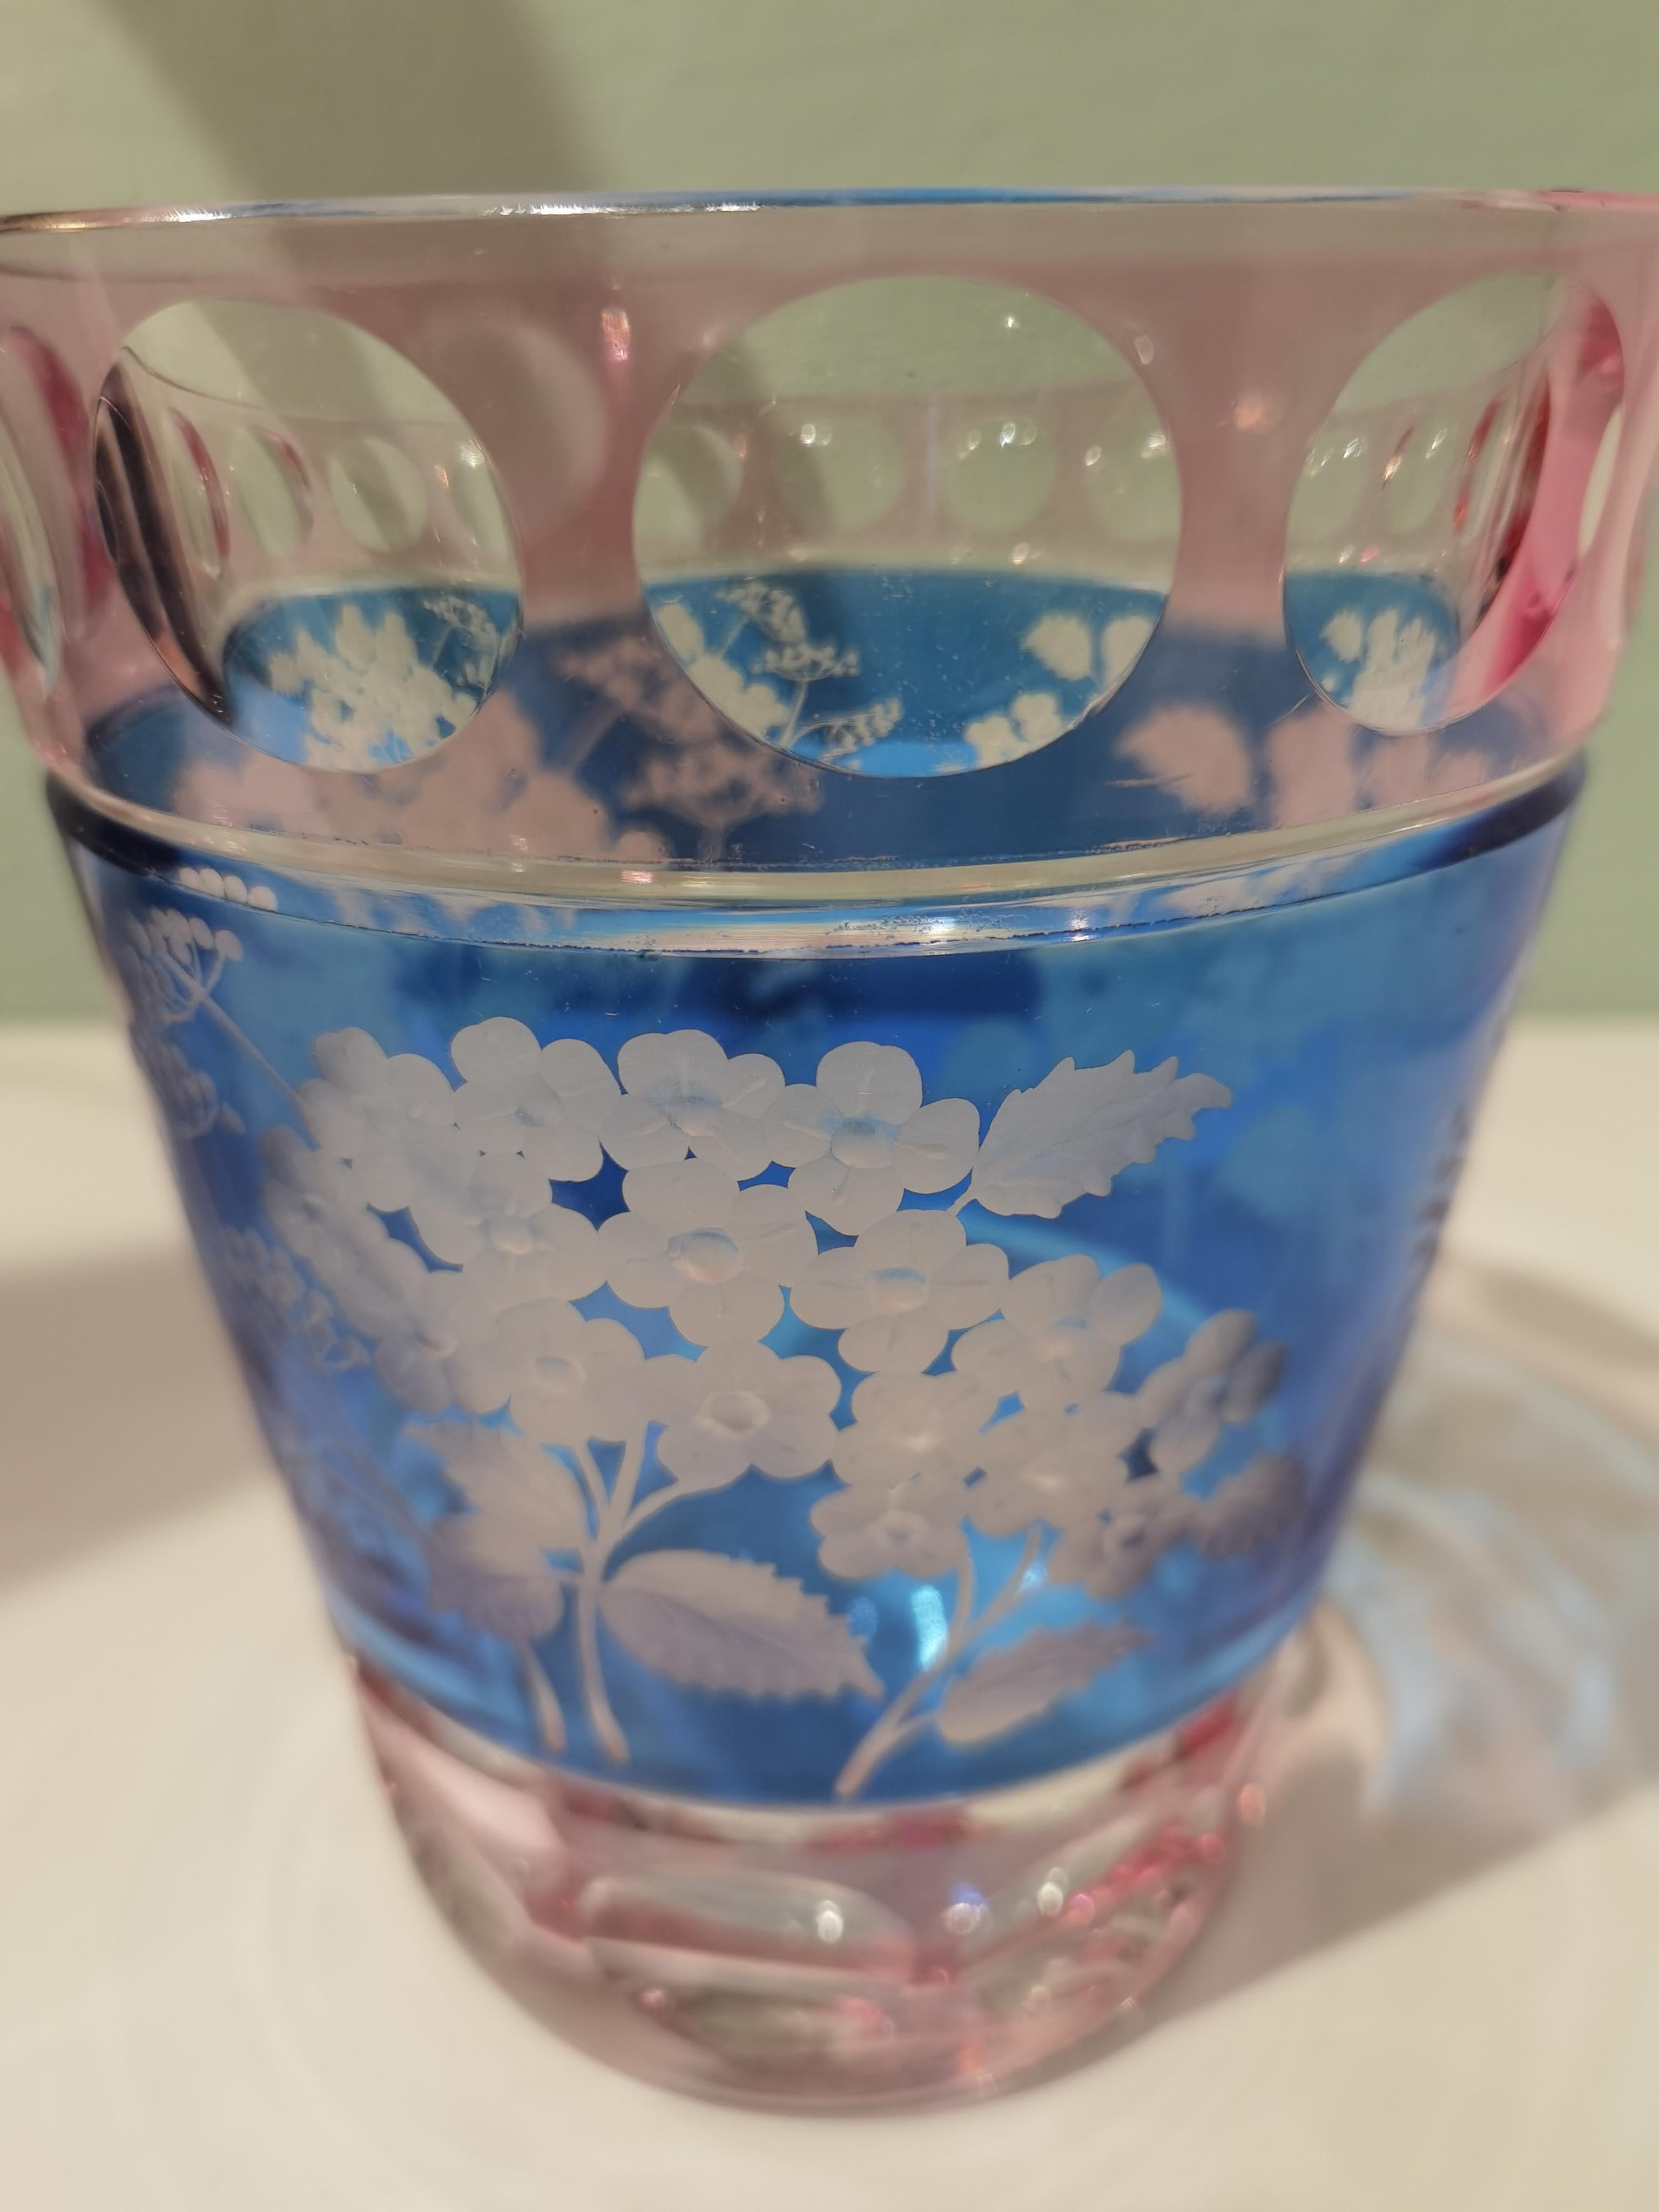 Hand blown crystal vase in pale pink and blue crystal with a country style flower decor all around. The decor shows hydrangea flowers in naturalistic style. Completely hand blown and hand-engraved in Bavaria/Germany. The glass here shown comes in